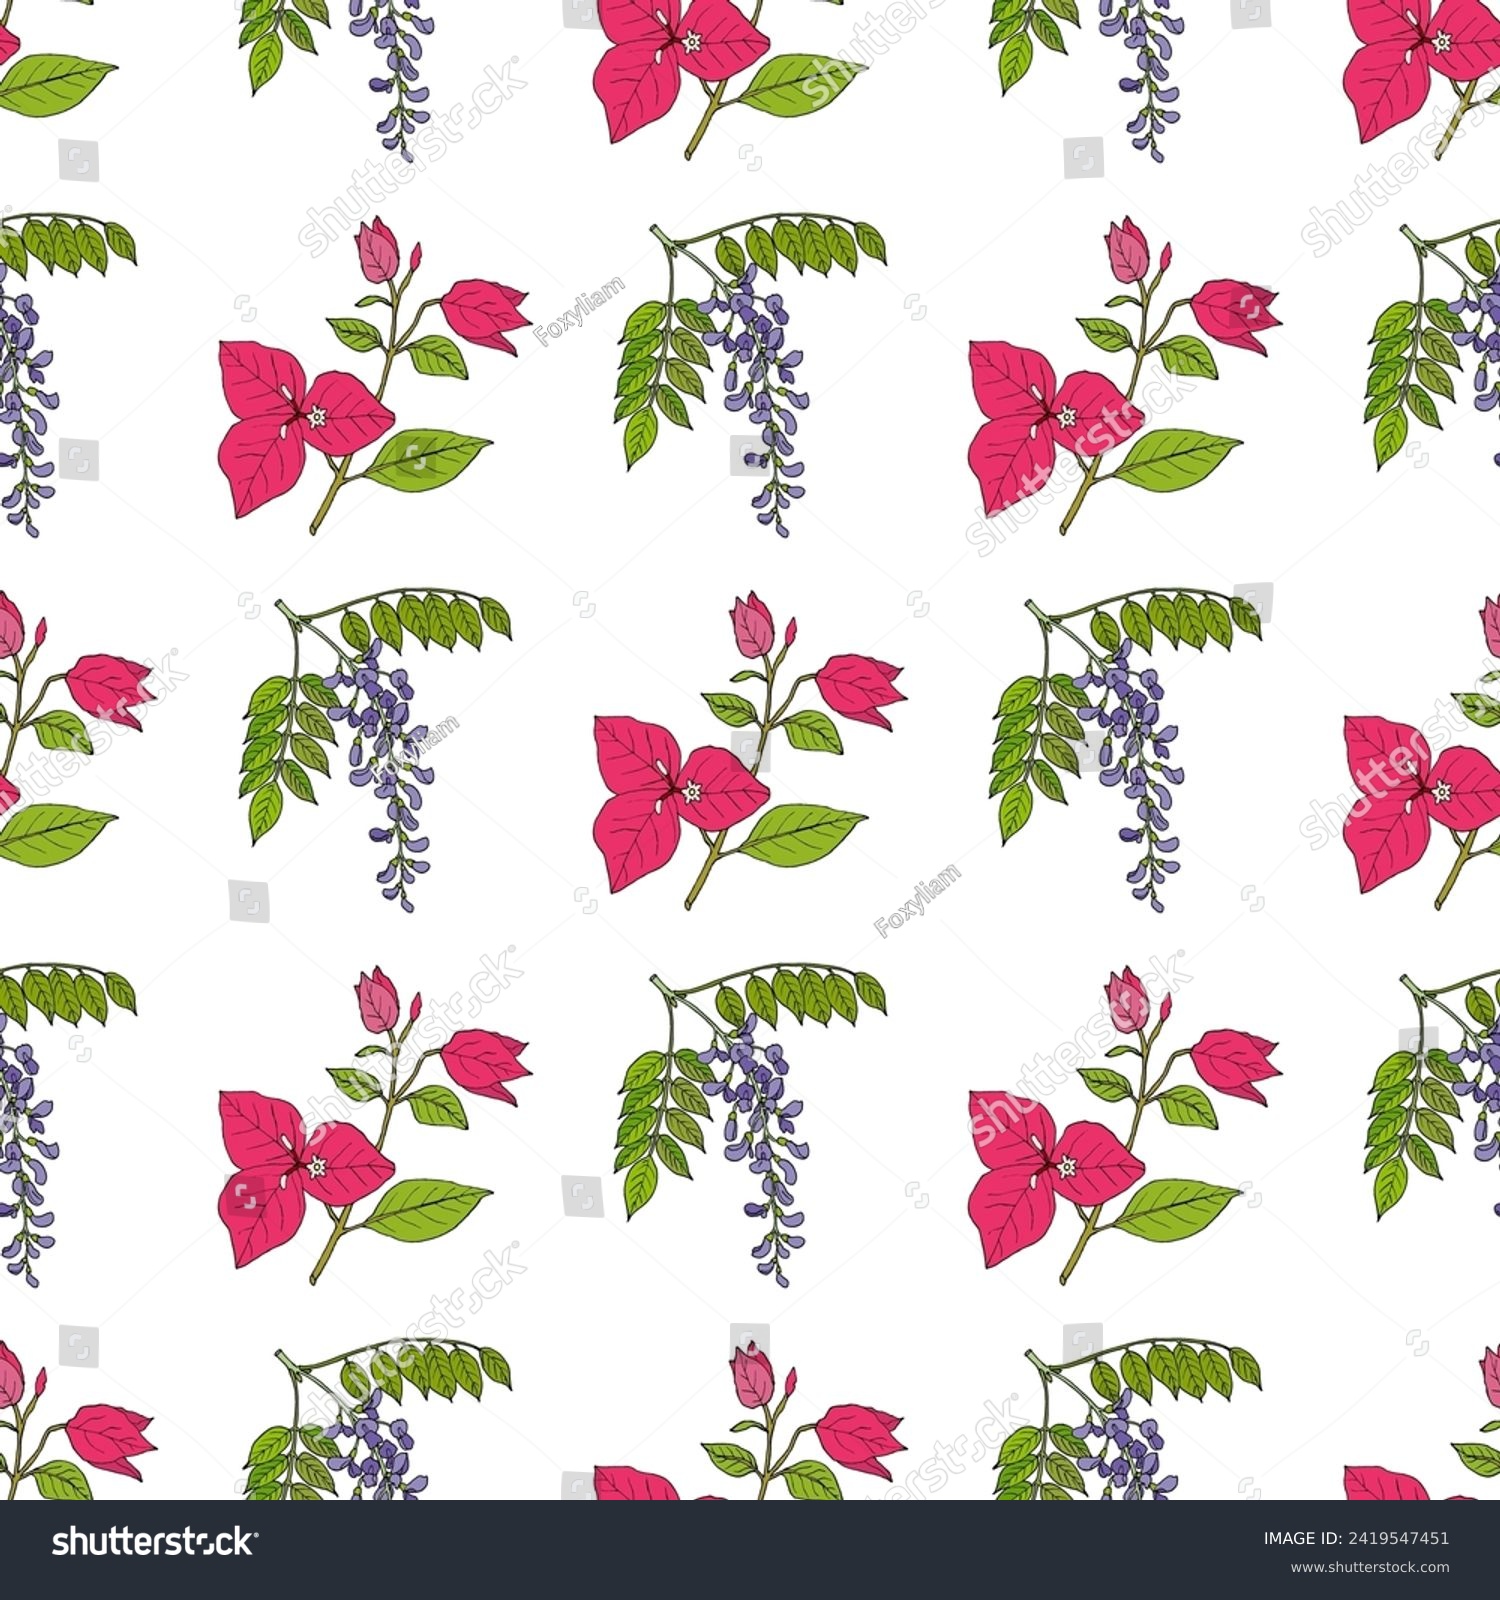 SVG of Seamless pattern with hand drawn bougainvillea and chinese wisteria (wisteria sinensis), medicinal and ornamental plant. Vector illustration svg